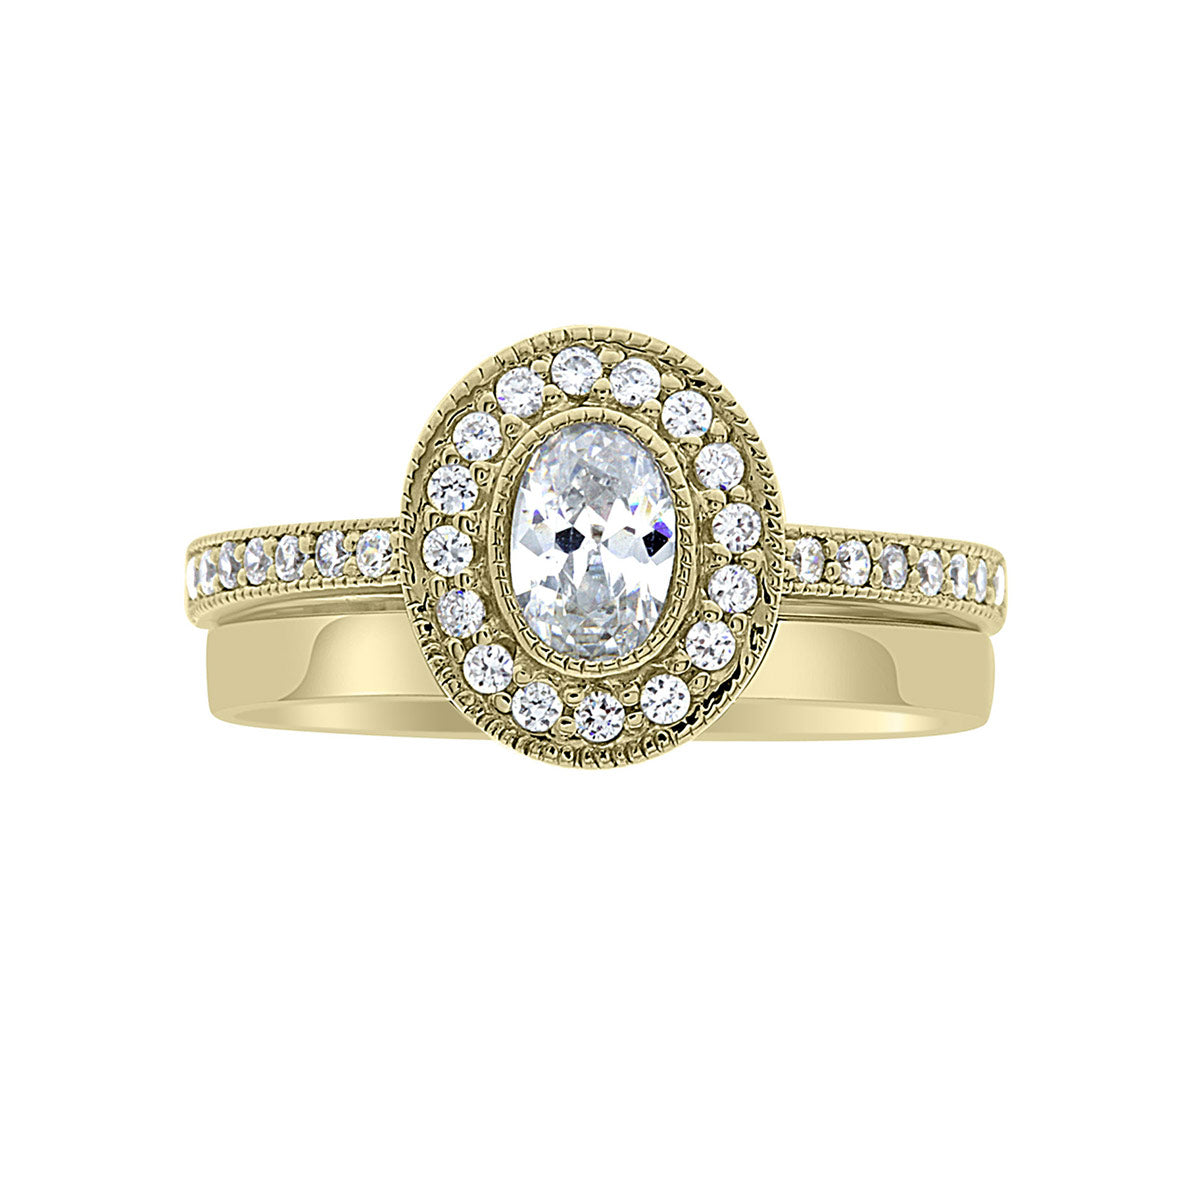 Milgrain Detail Engagement Ring in yellow gold with a plain gold wedding band